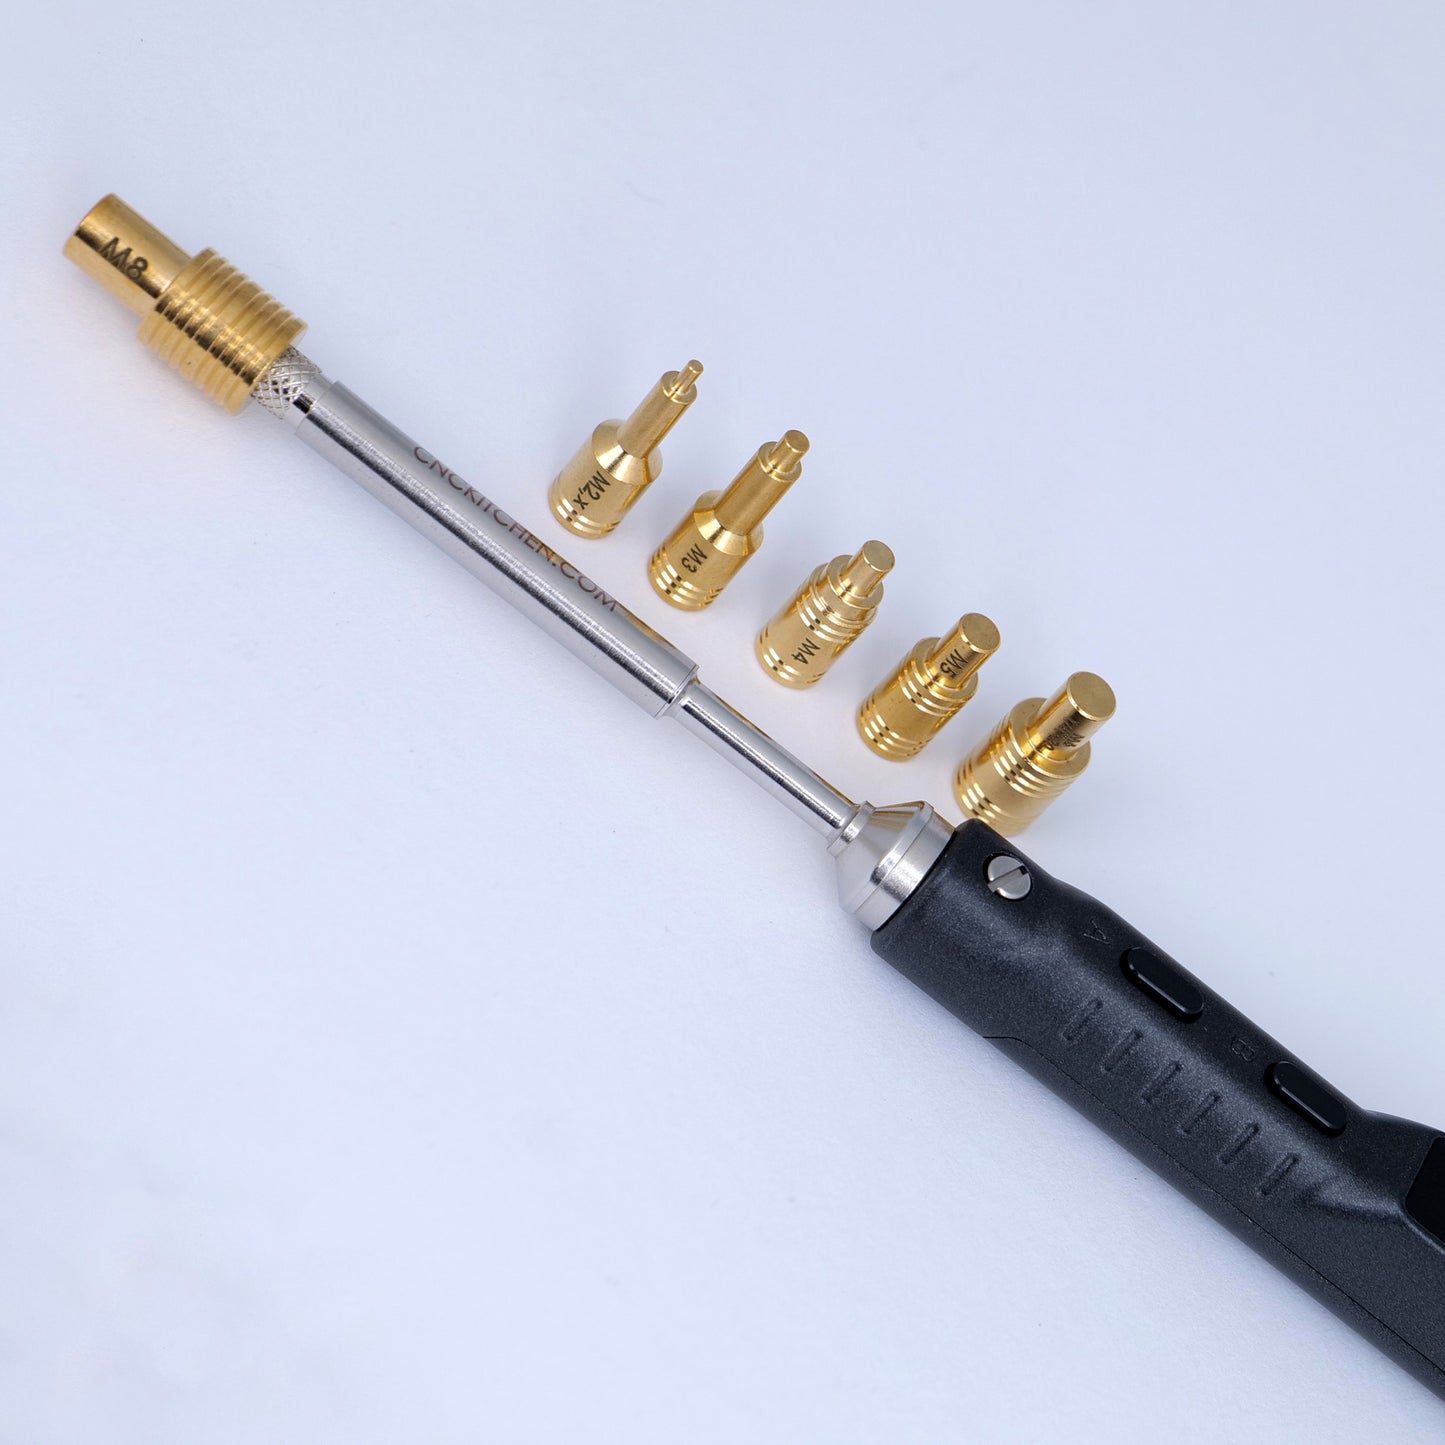 Soldering Tips SET compatible with TS100 & TS101